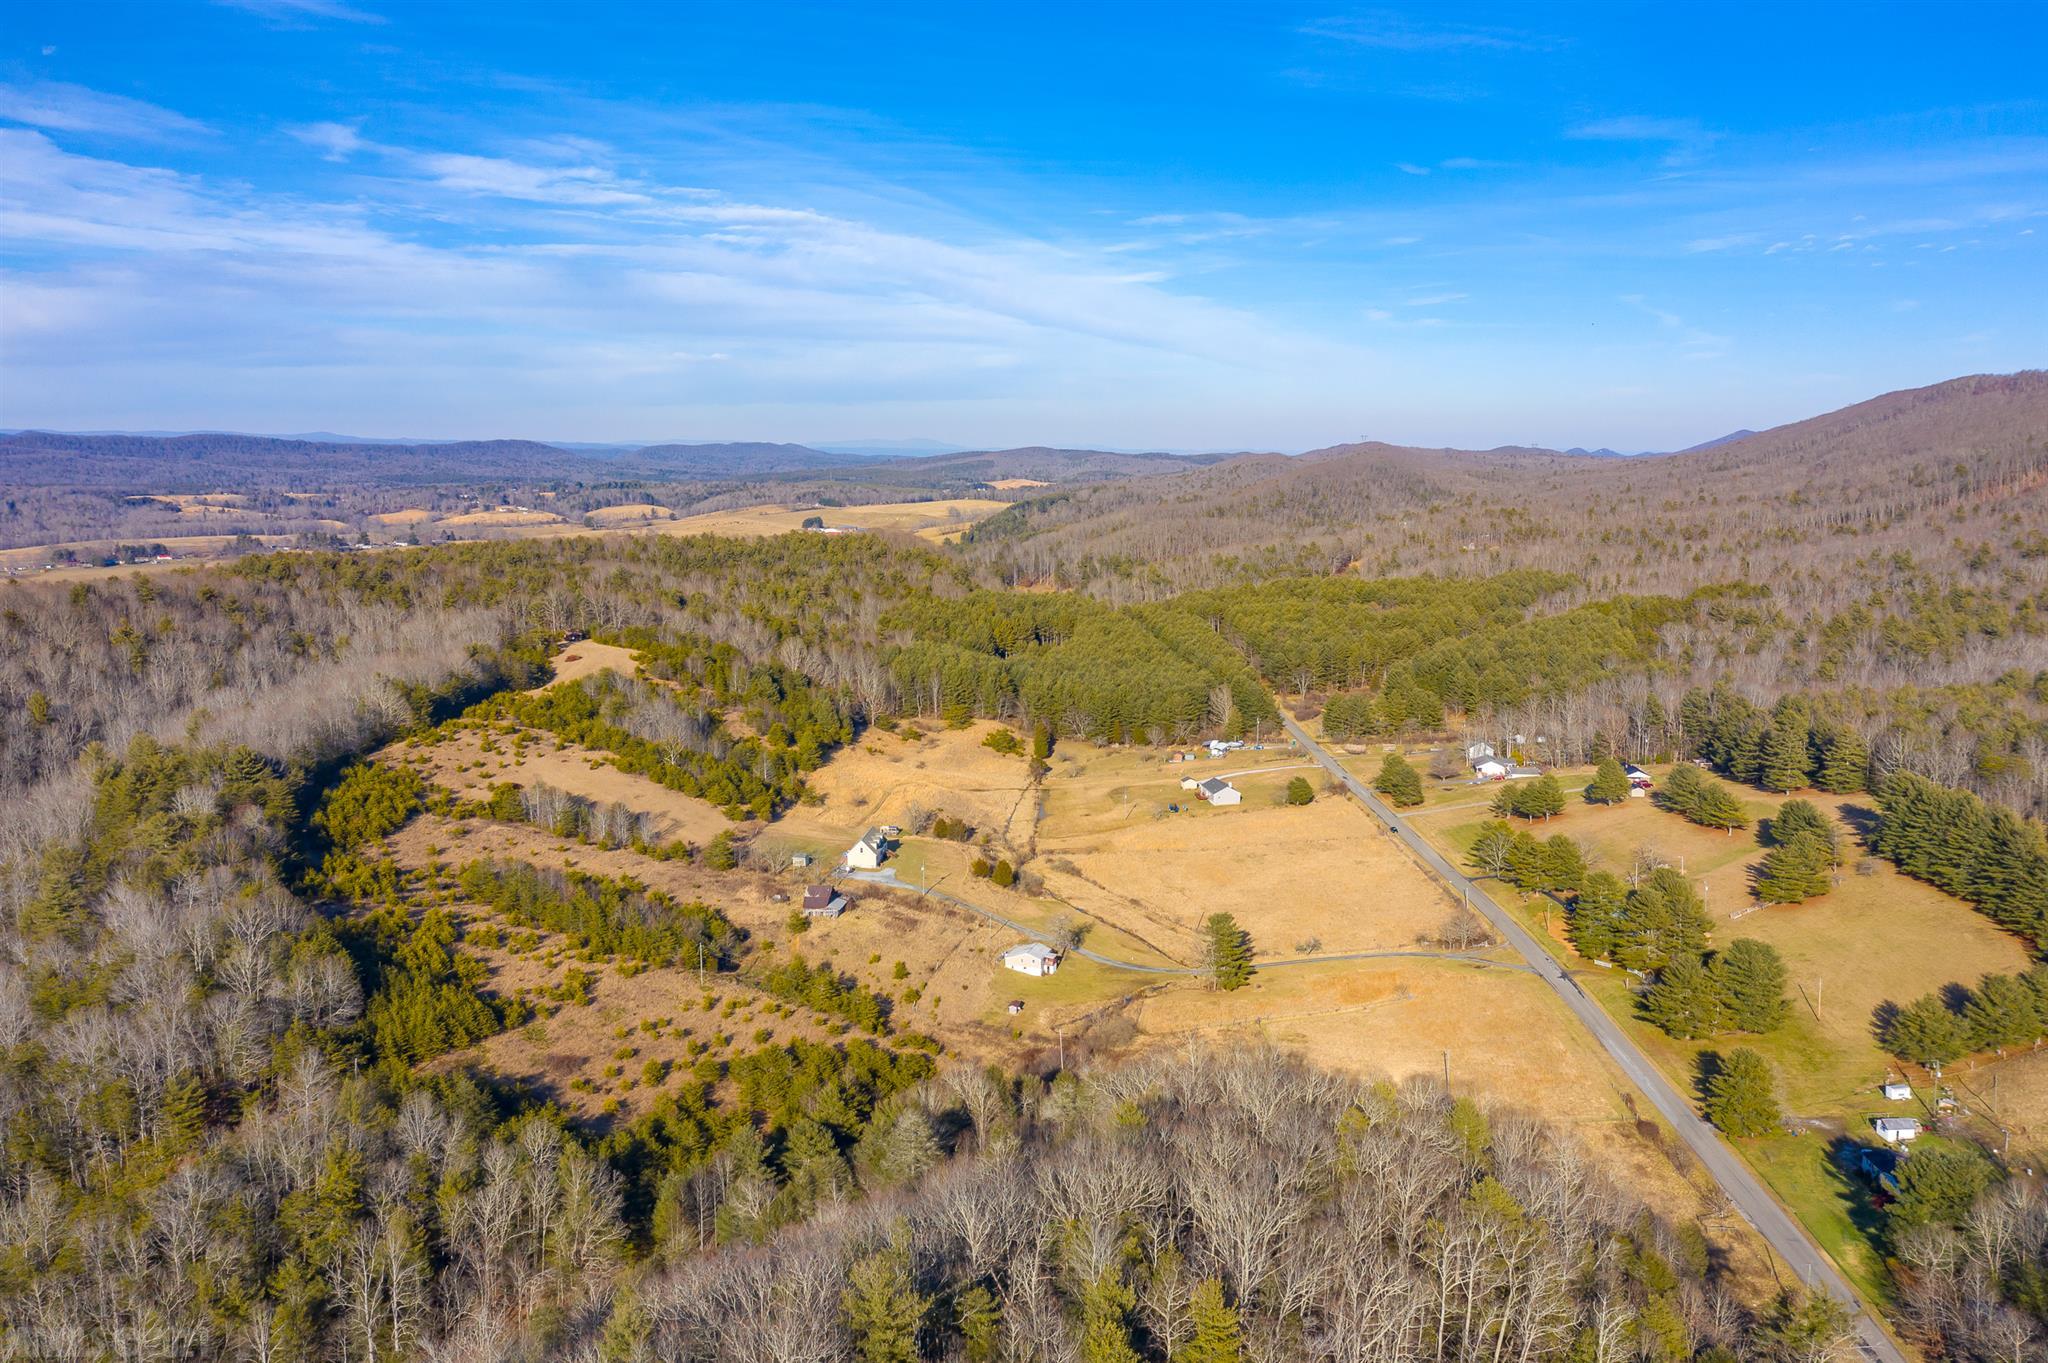 If you are looking for a beautiful property with a mountain view to build your home or for hunting, this is for you. 2 parcels totaling 53.97 acres with paved road frontage in a county setting and only minutes away from town or the interstate.